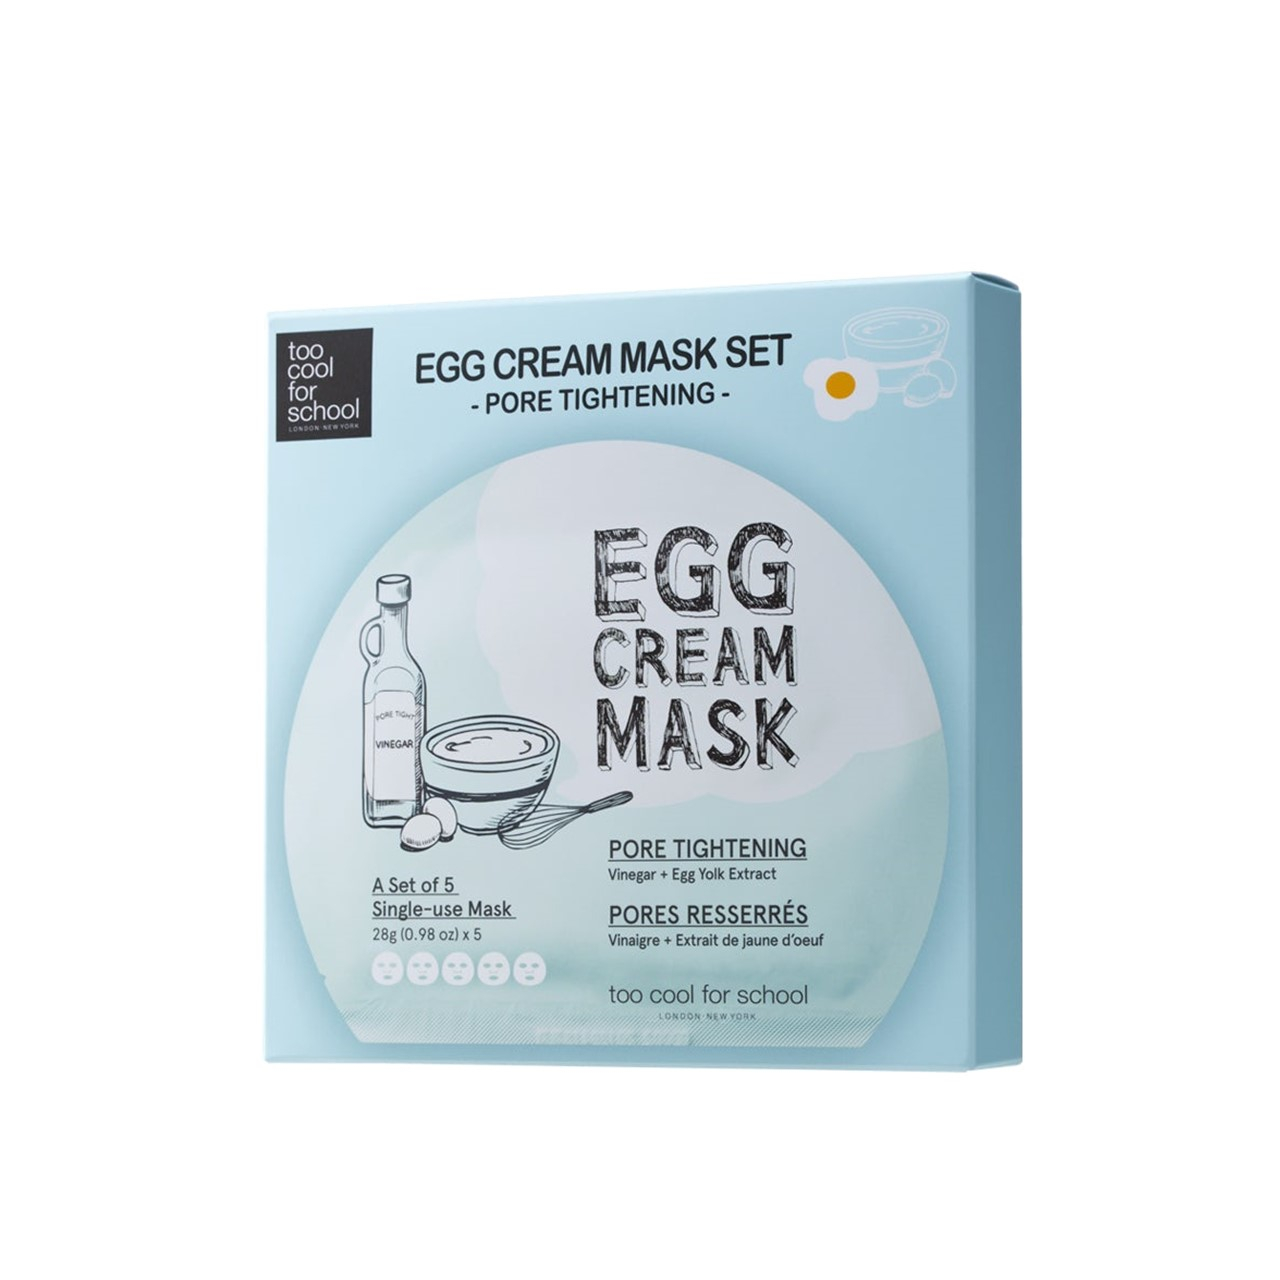 Too Cool For School Egg Cream Pore Tightening Mask Set 5x28g